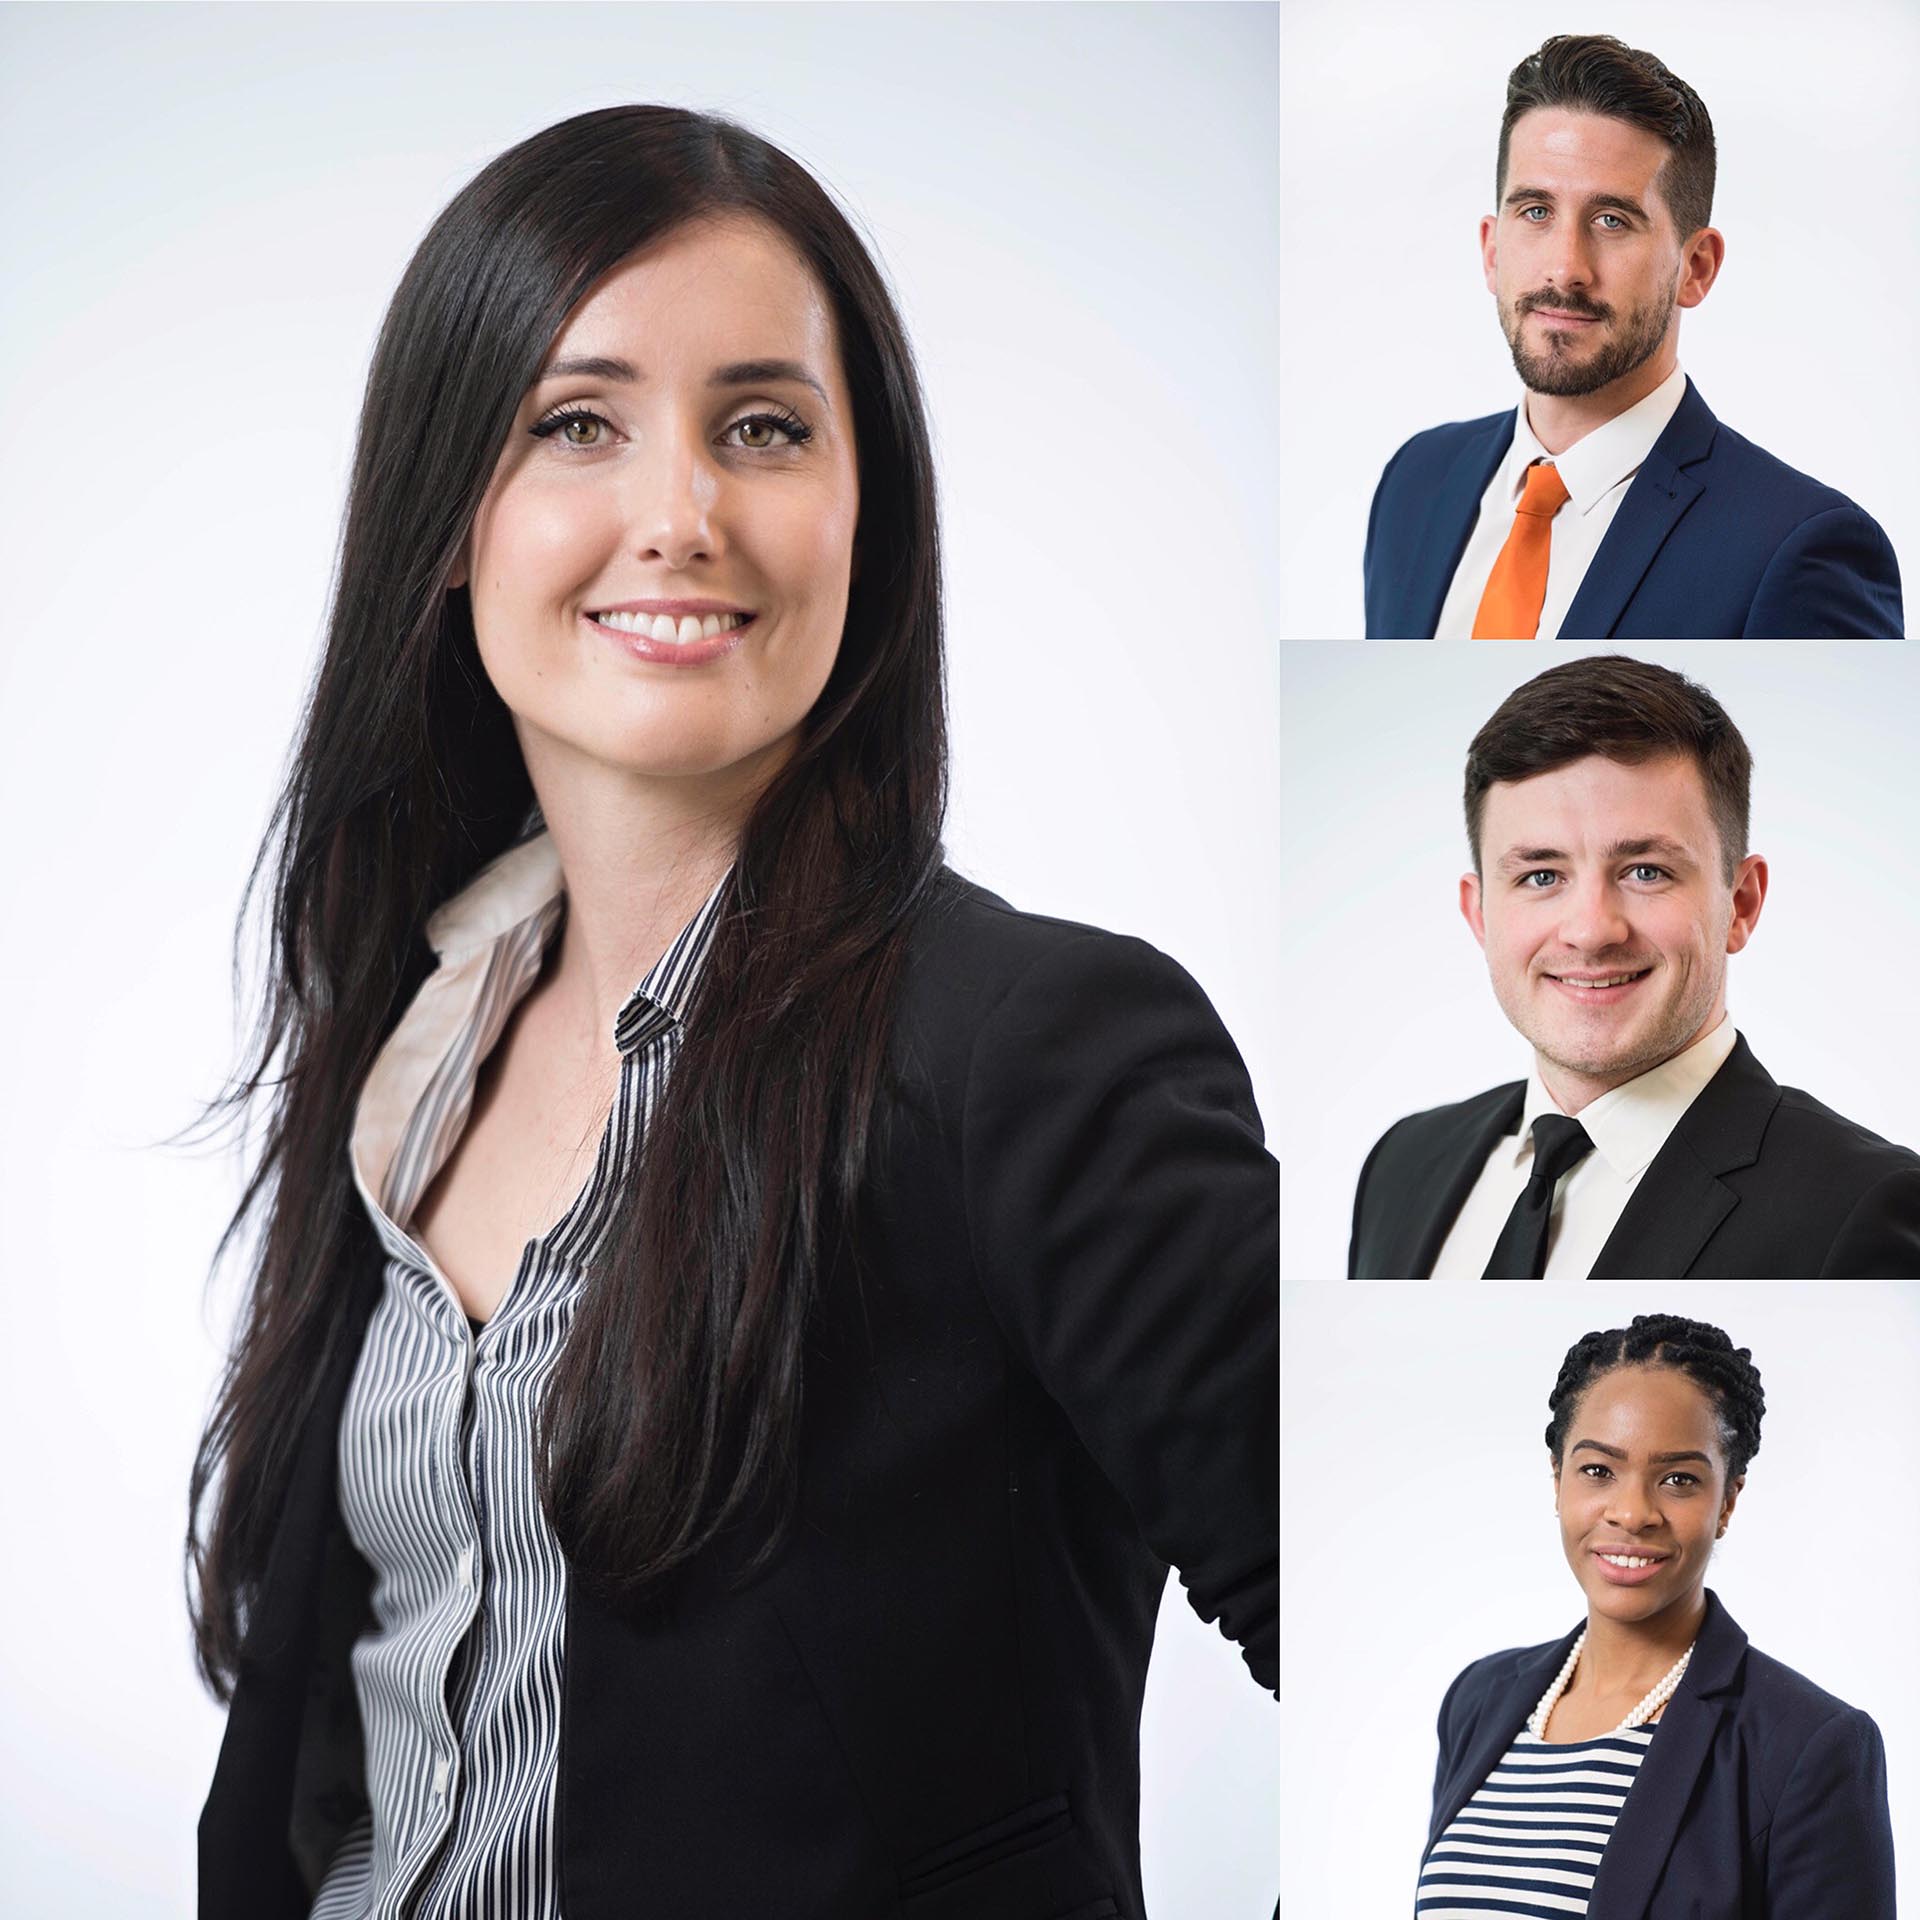 Photograph of Team members of UK Law firm various team member headshots photography by Jon Parker Lee